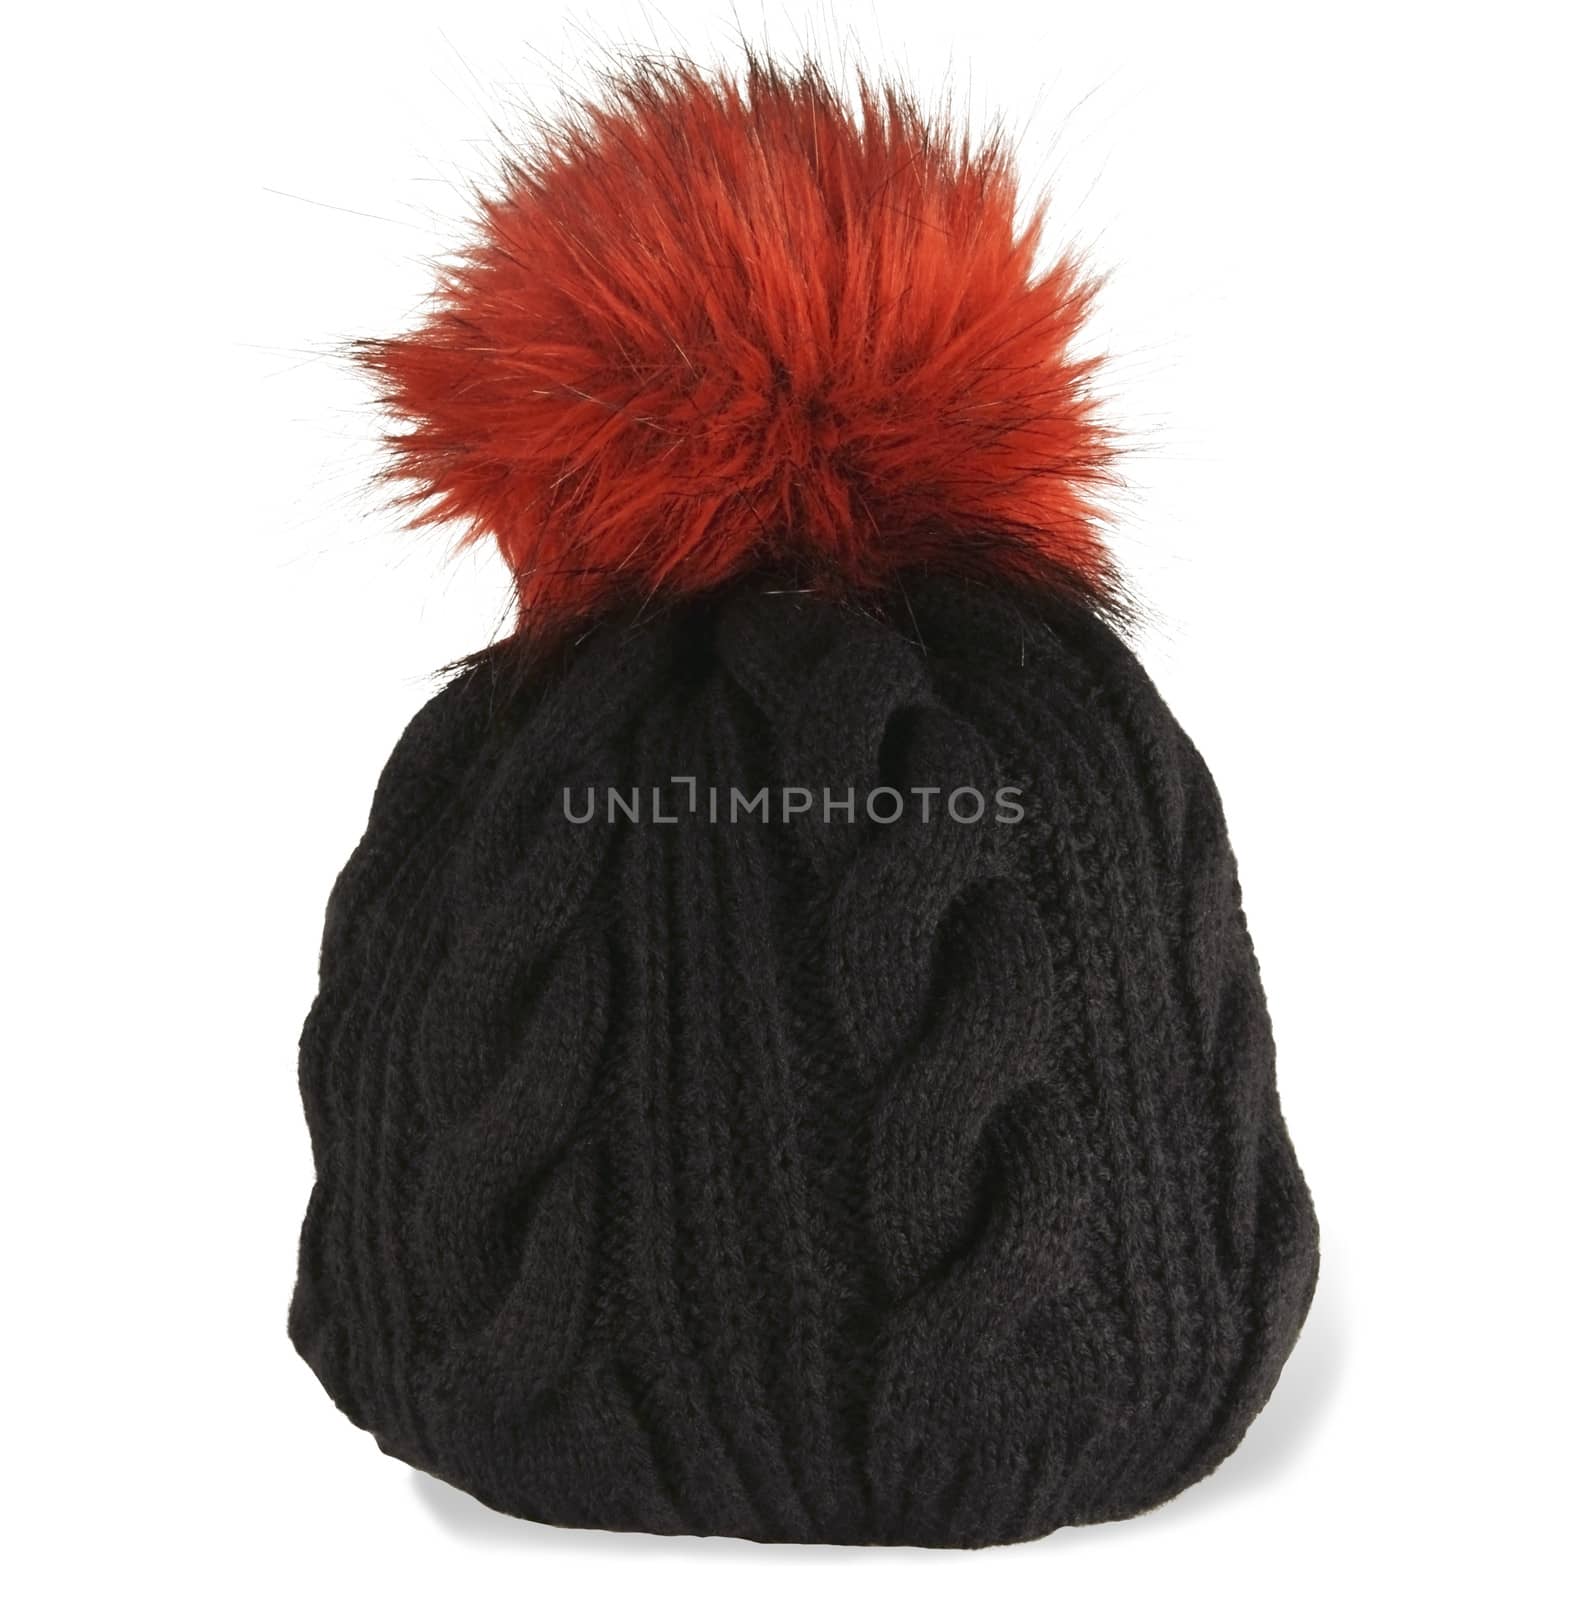 black knit cap with a red pompon by ires007